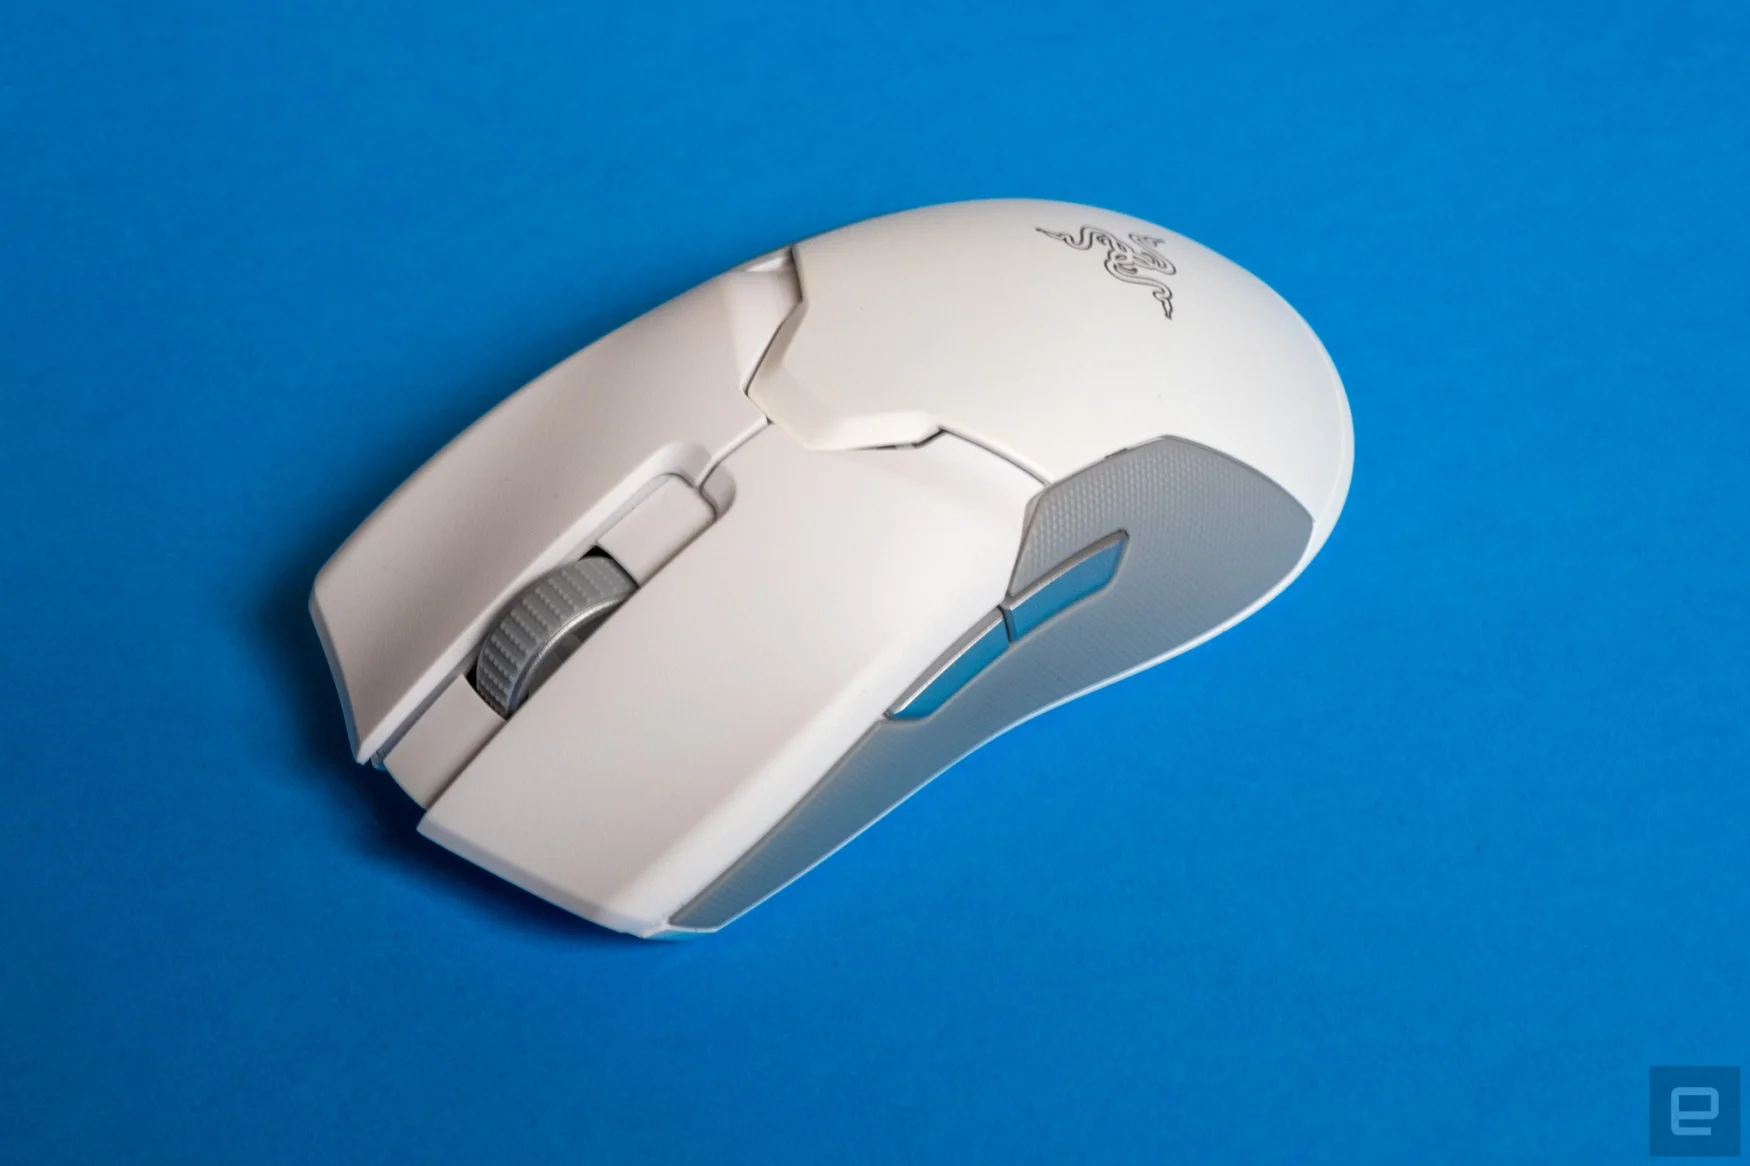 Razer's Viper is a surprisingly good mouse for general productivity.